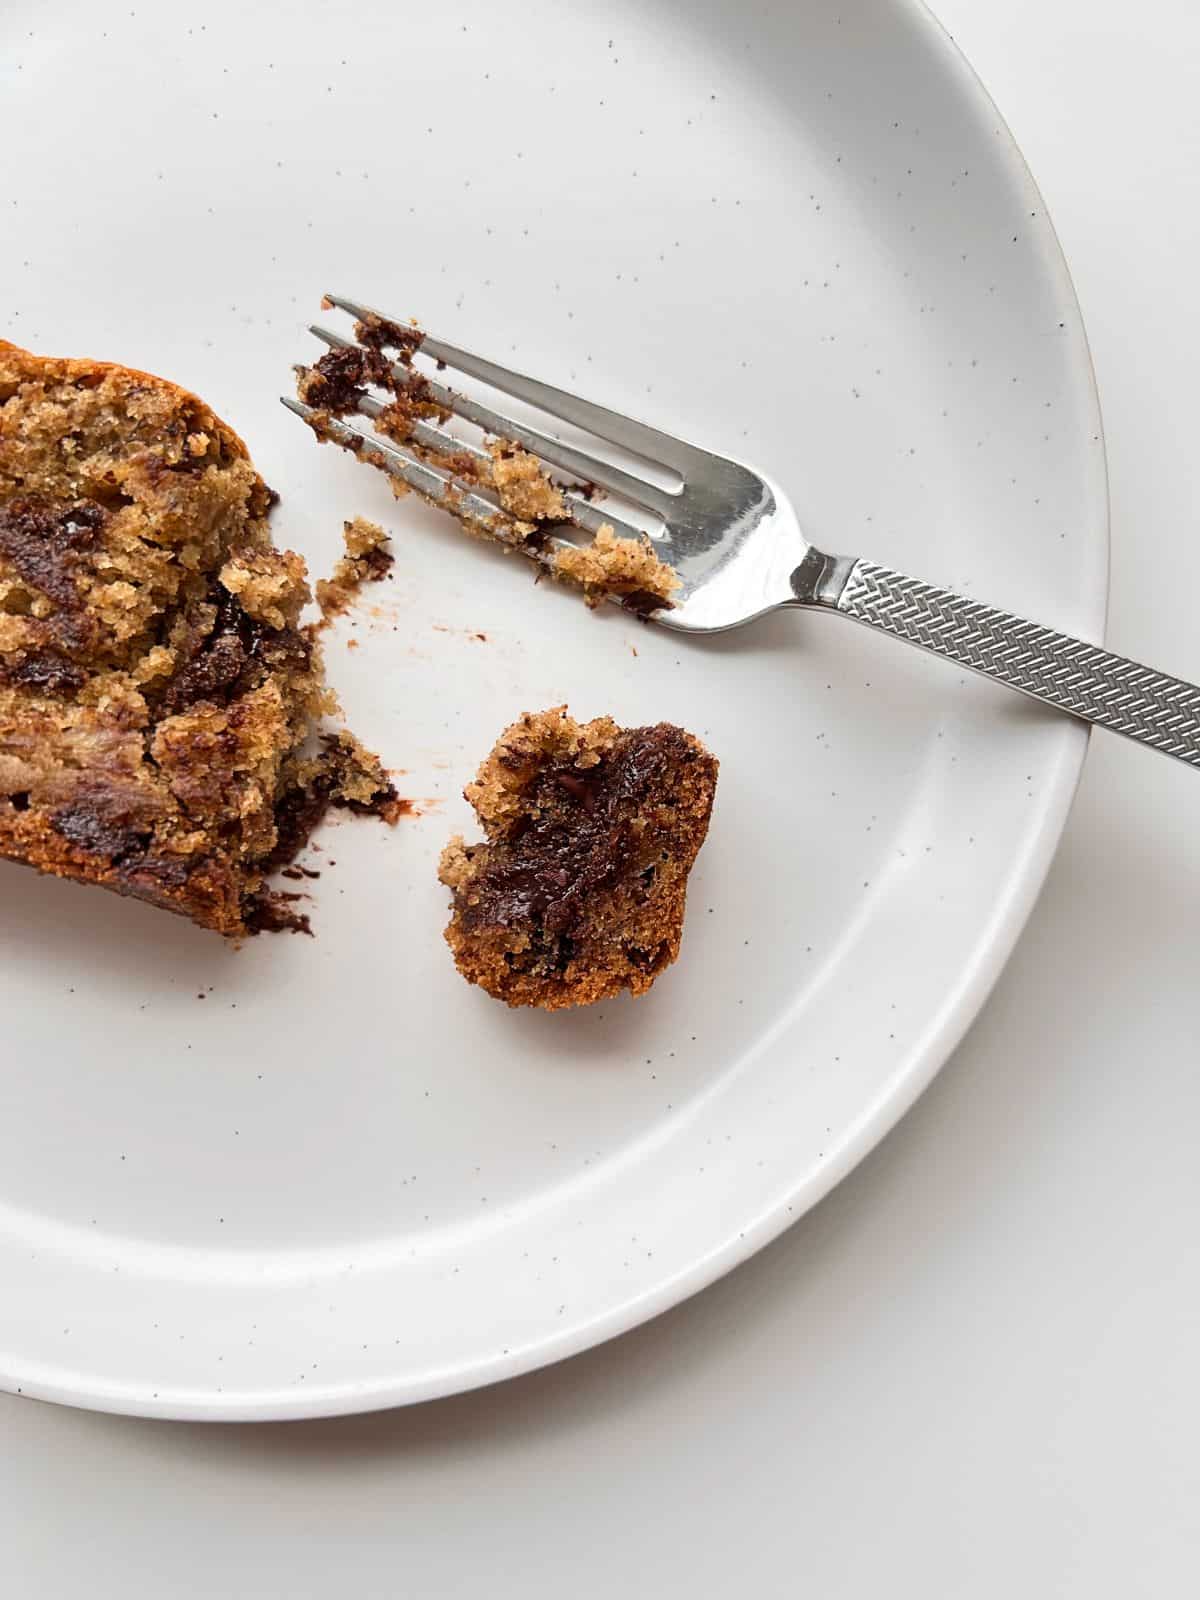 An image of a partially eaten slice of Super Chocolatey Banana bread on a cream coloured plate with a silver fork nearby.